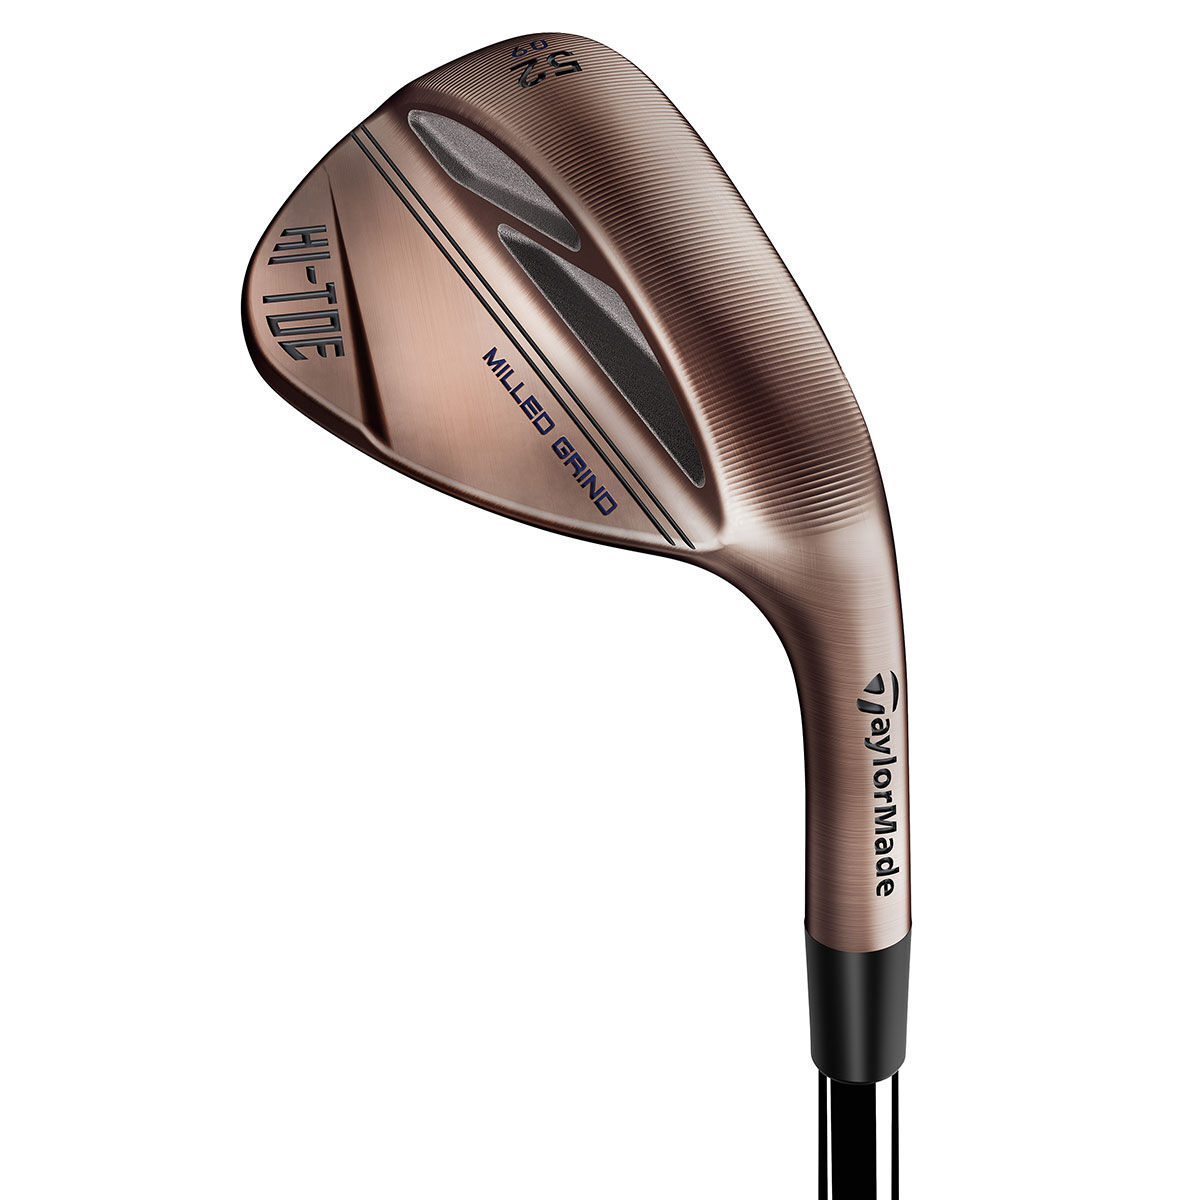 TaylorMade Brown Hi-Toe 3 Left Hand Golf Wedge, Size: 58° | American Golf von TaylorMade